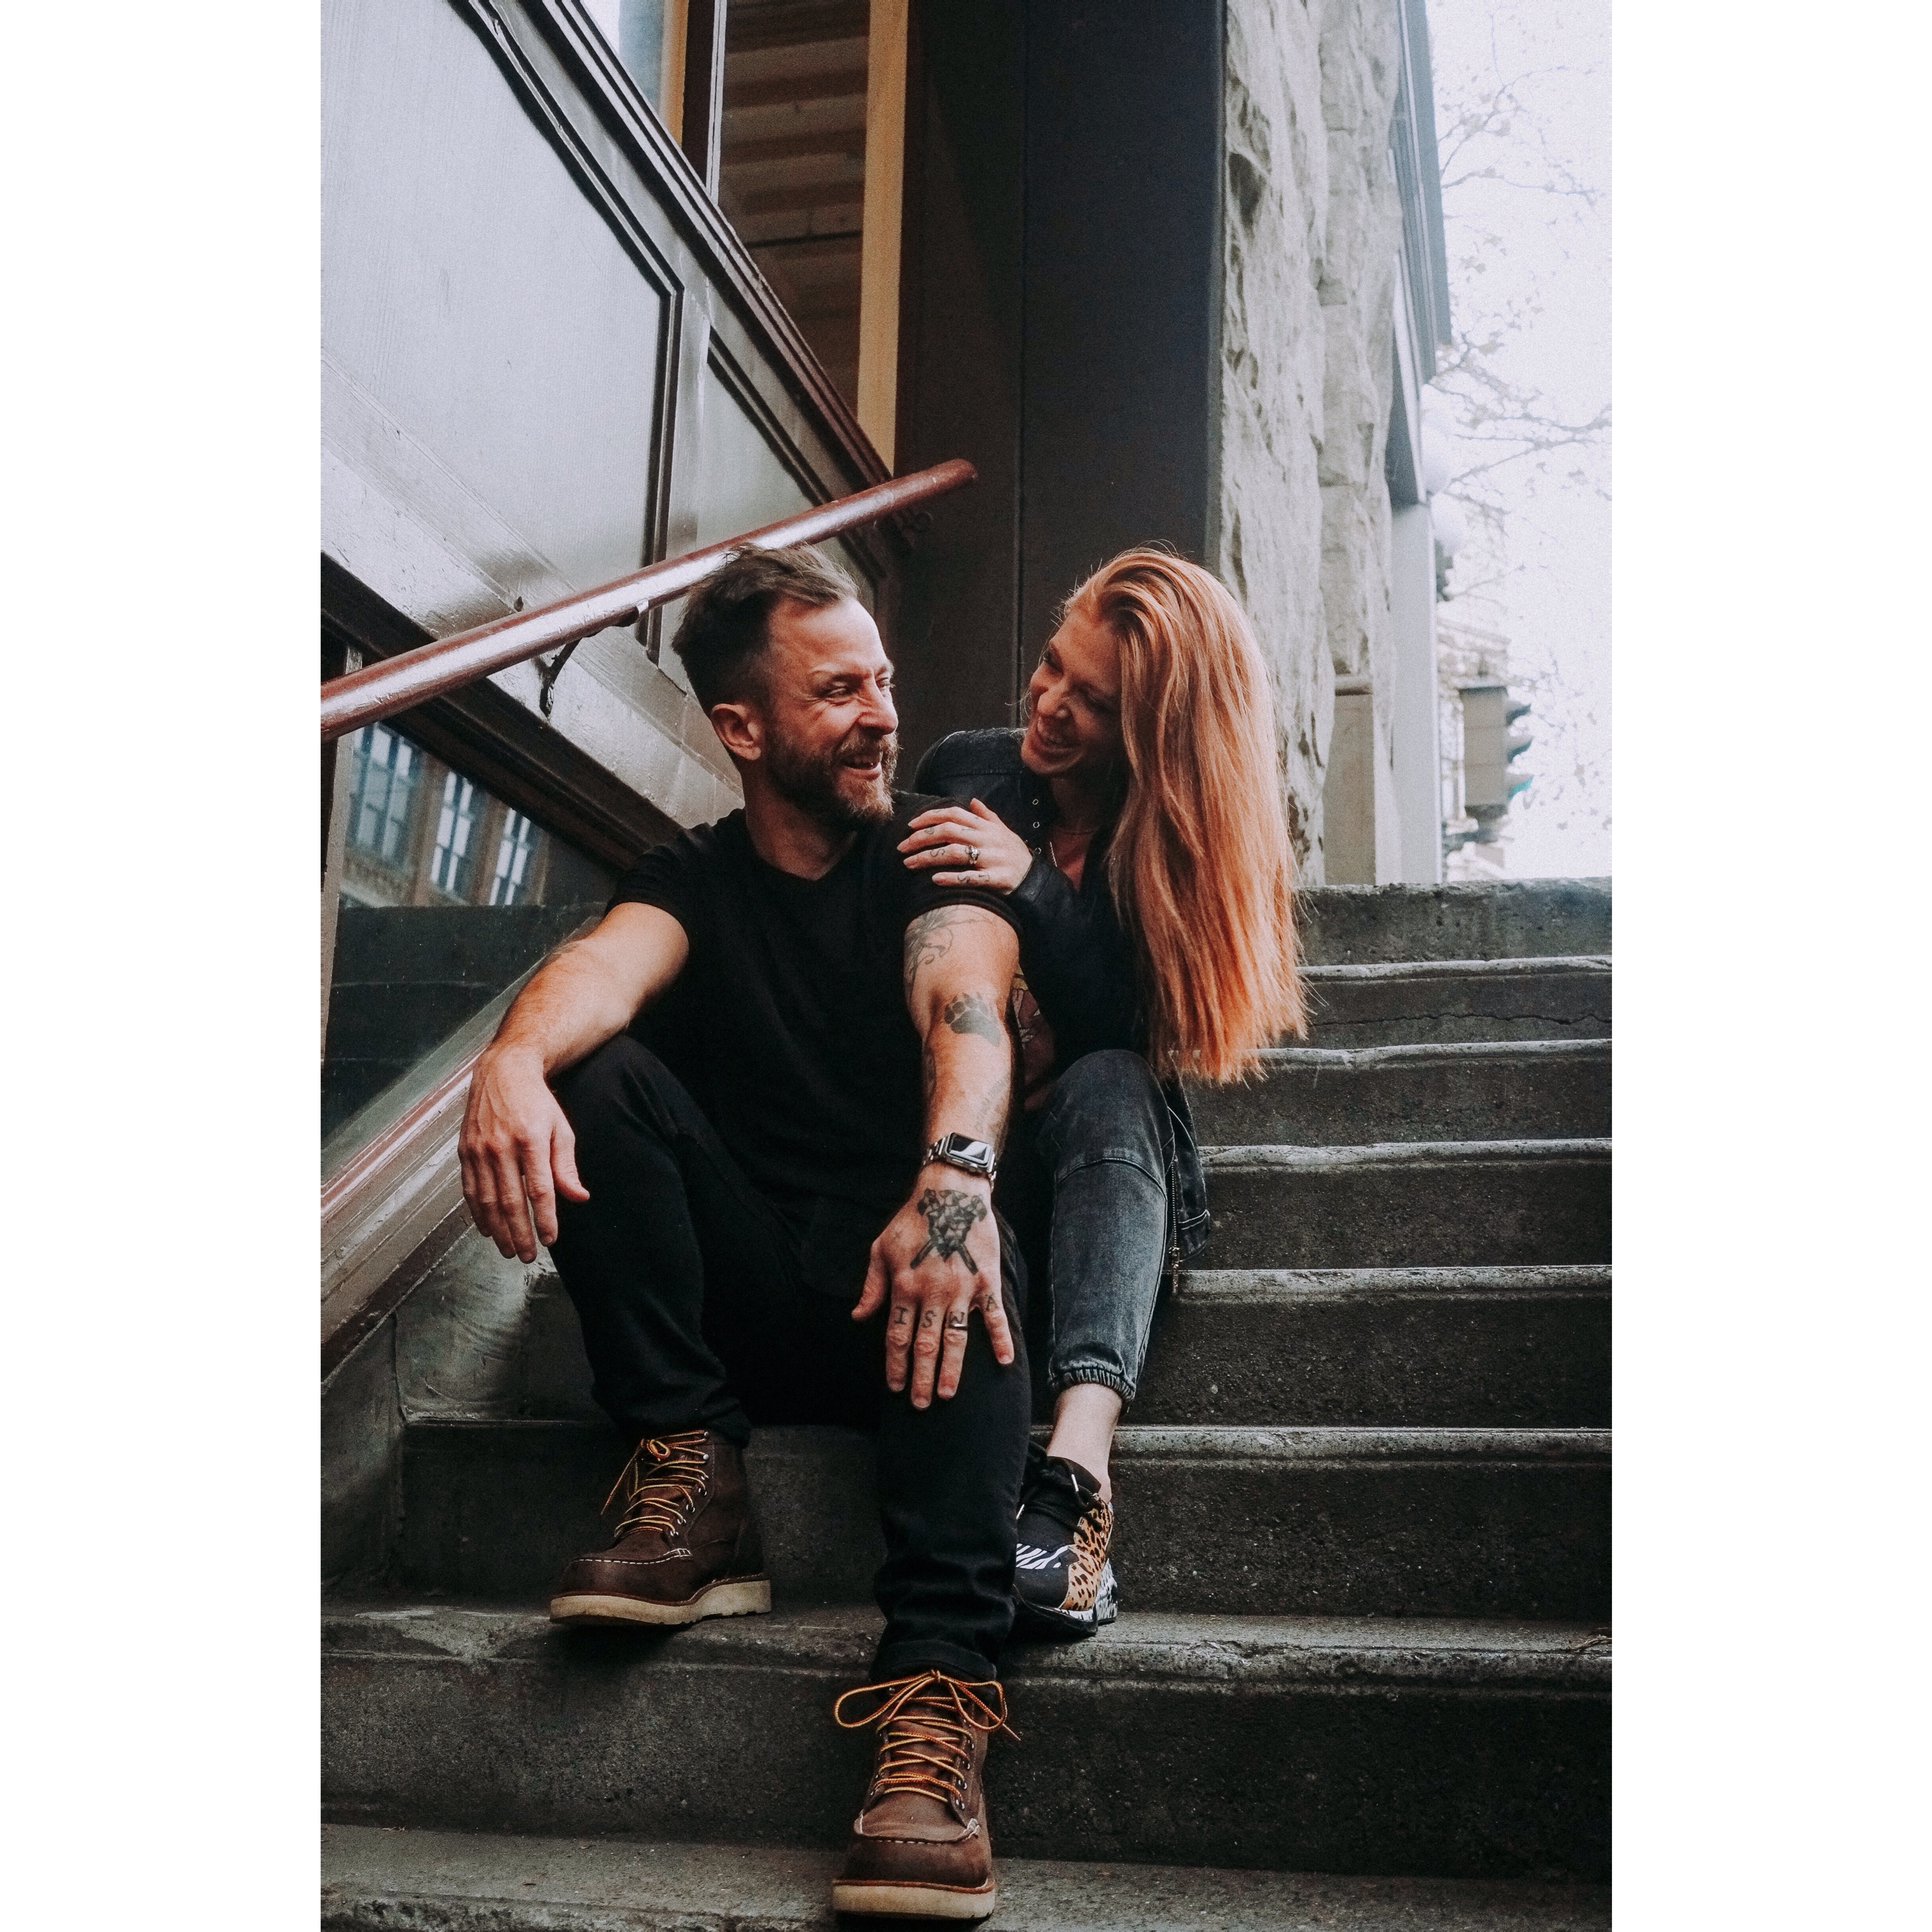 Young couple with tattoos sitting on steps, she's behind him, smiling at each other